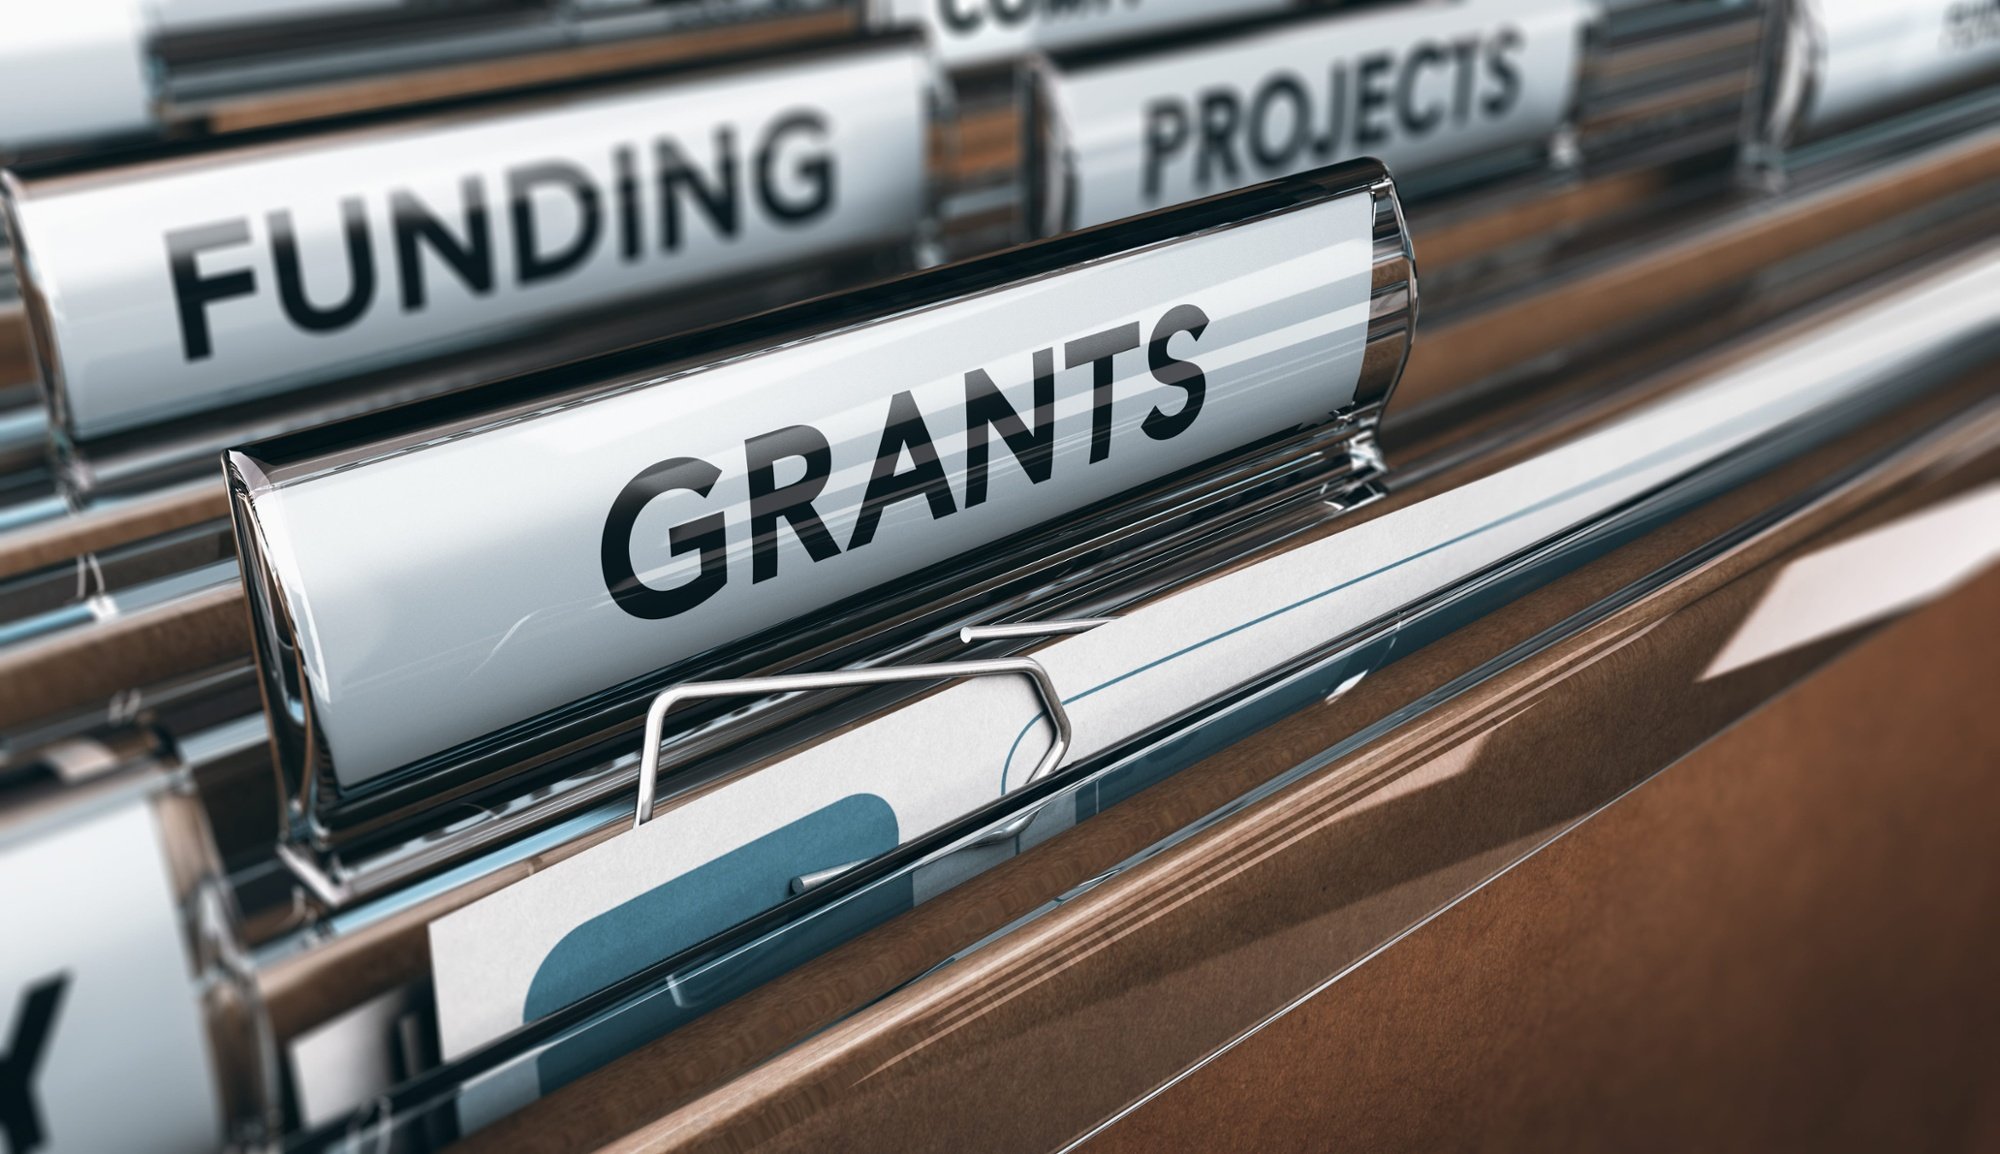 Higher ed funding and grants